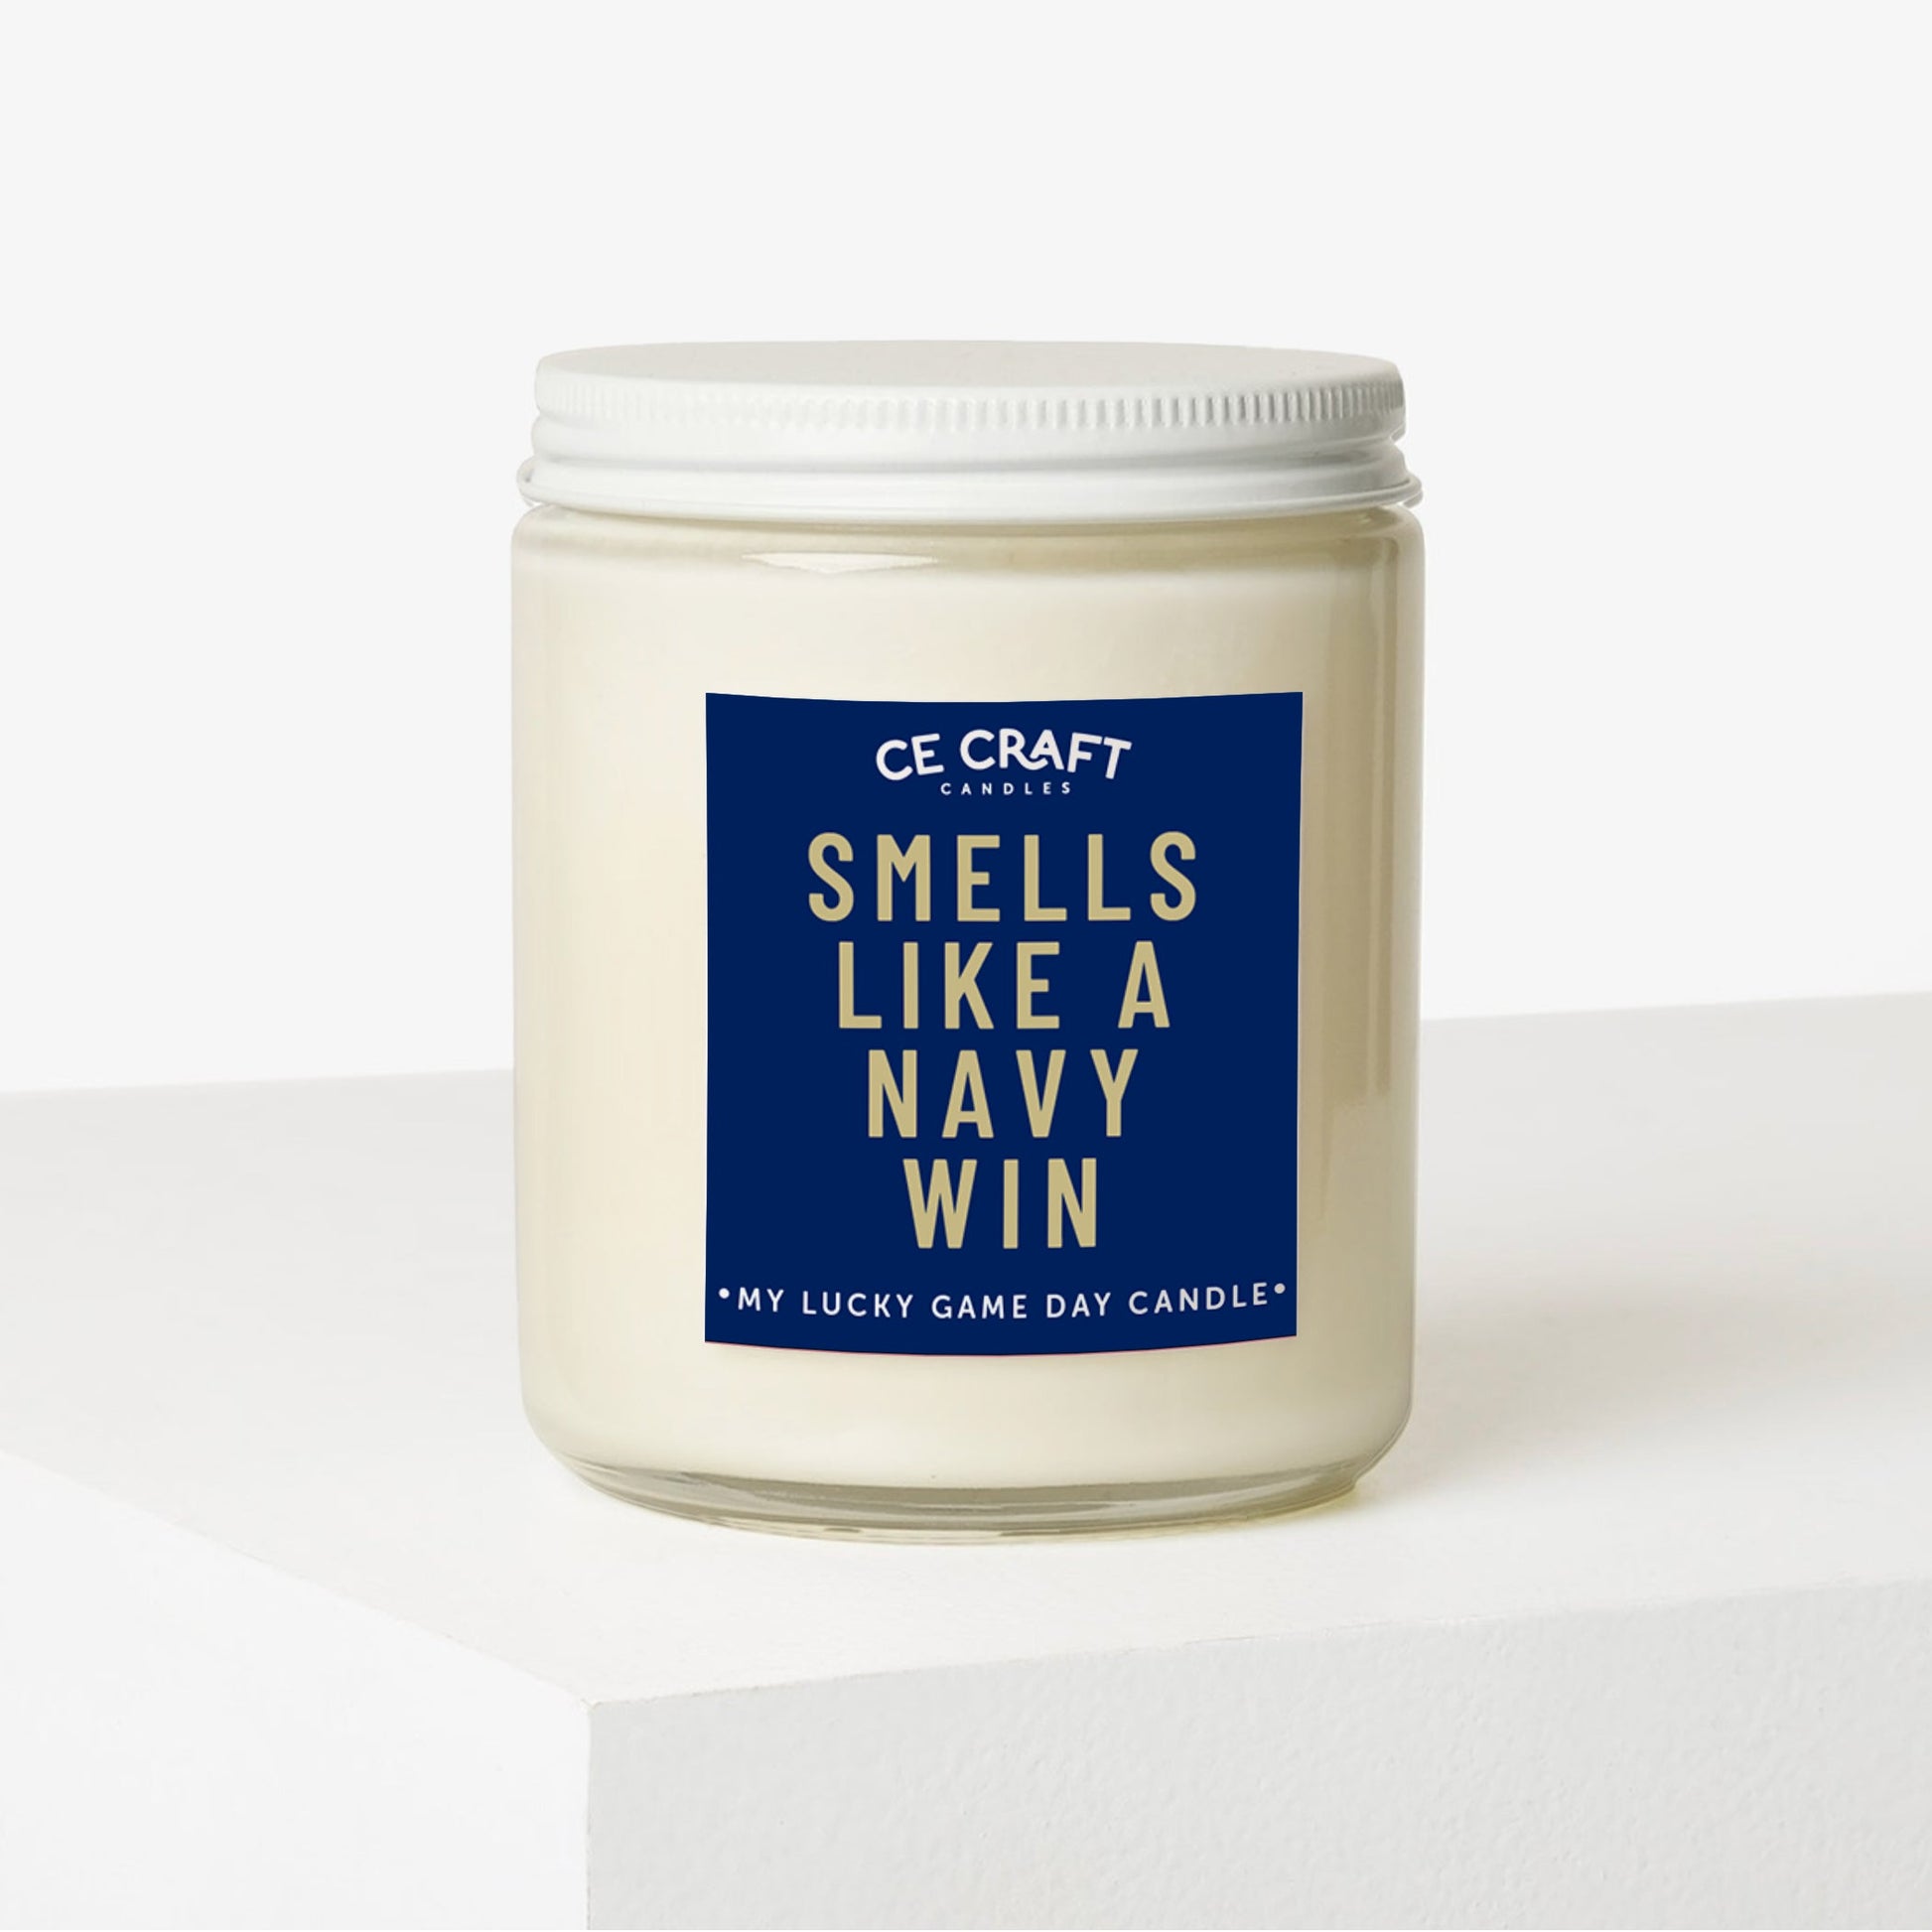 Smells Like A Navy Win Scented Candle Candles CE Craft 